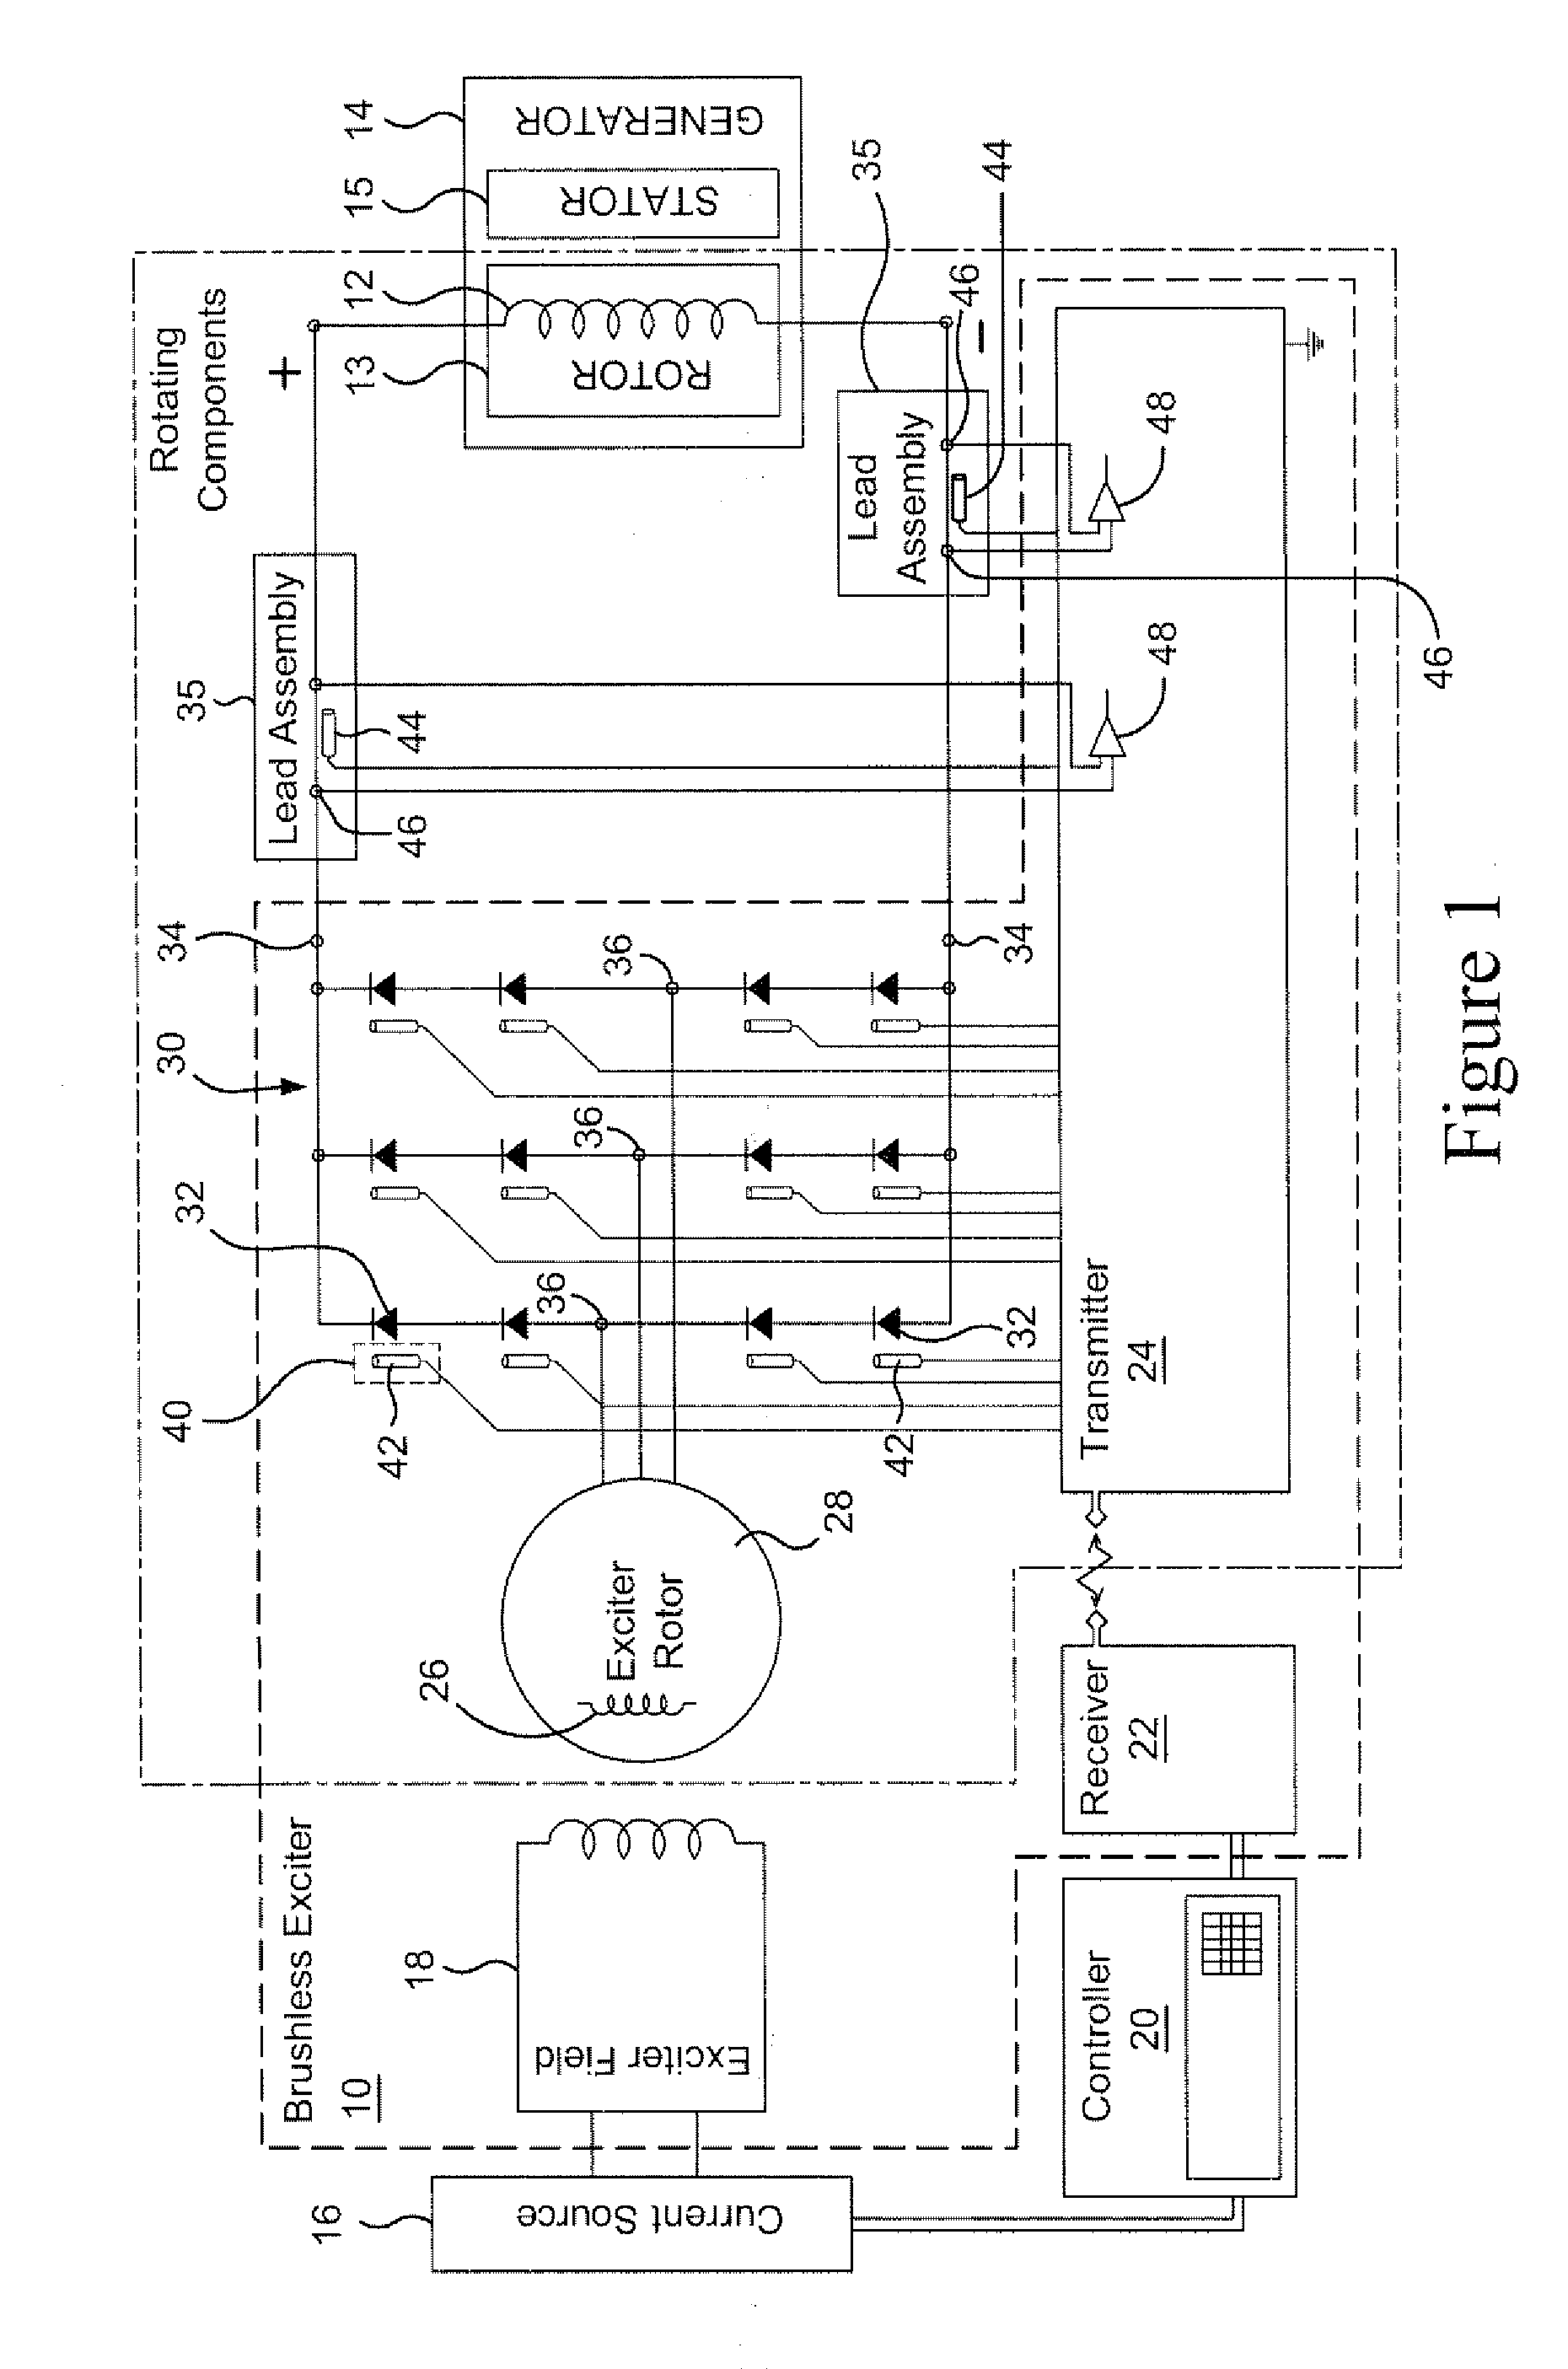 Method and apparatus for detecting a fault in a brushless exciter for a generator